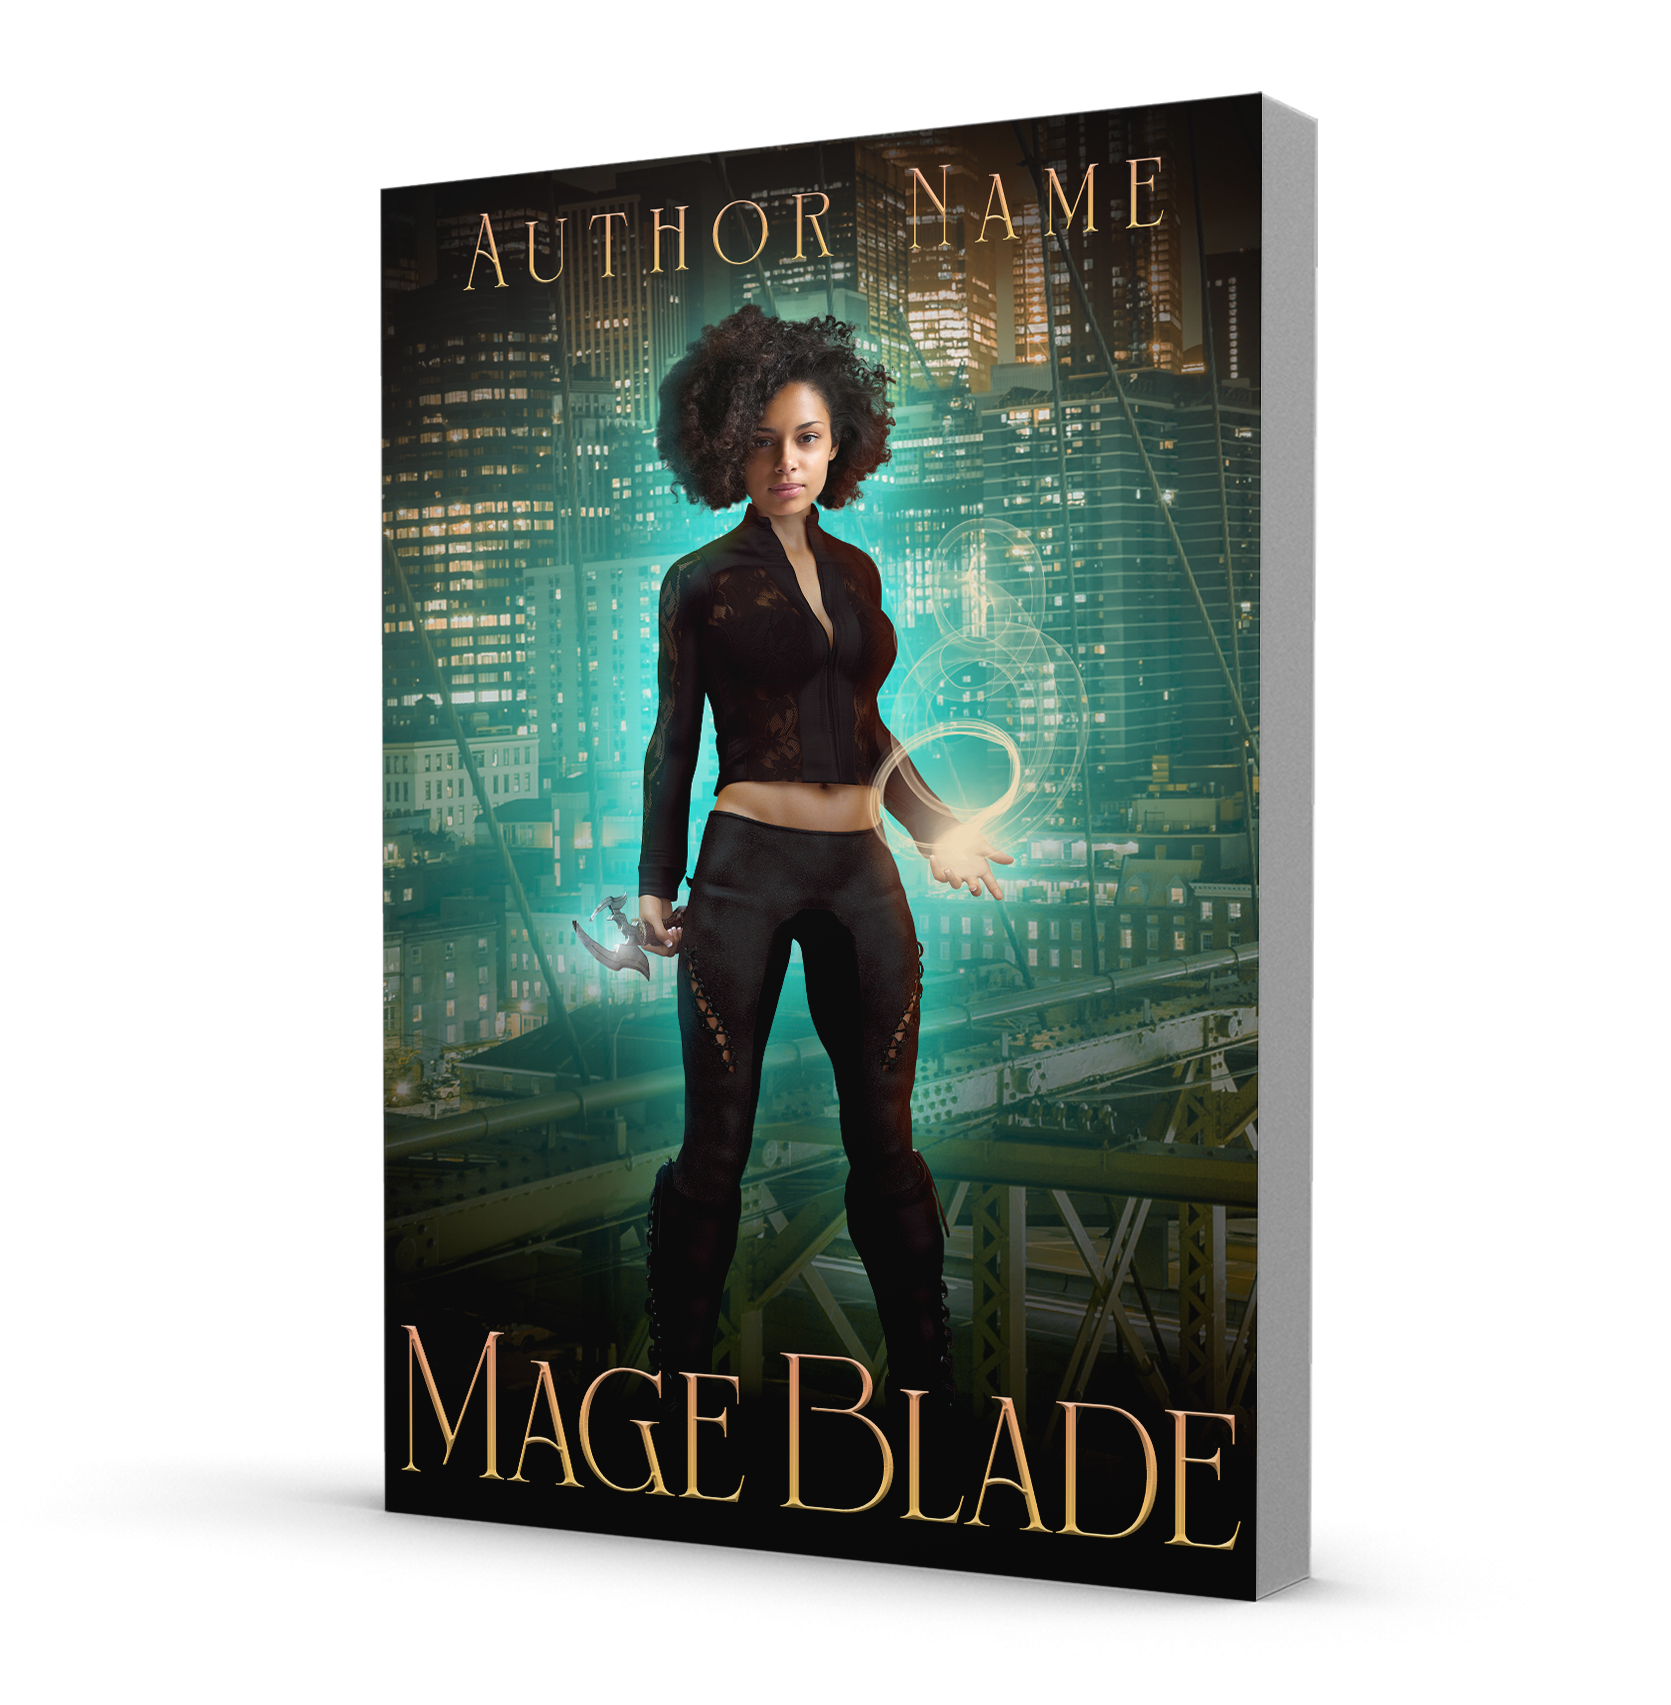 Urban fantasy book cover design featuring a Black heroine holding a ball of glowing magic and a bladed weapon in front of a city skyline.